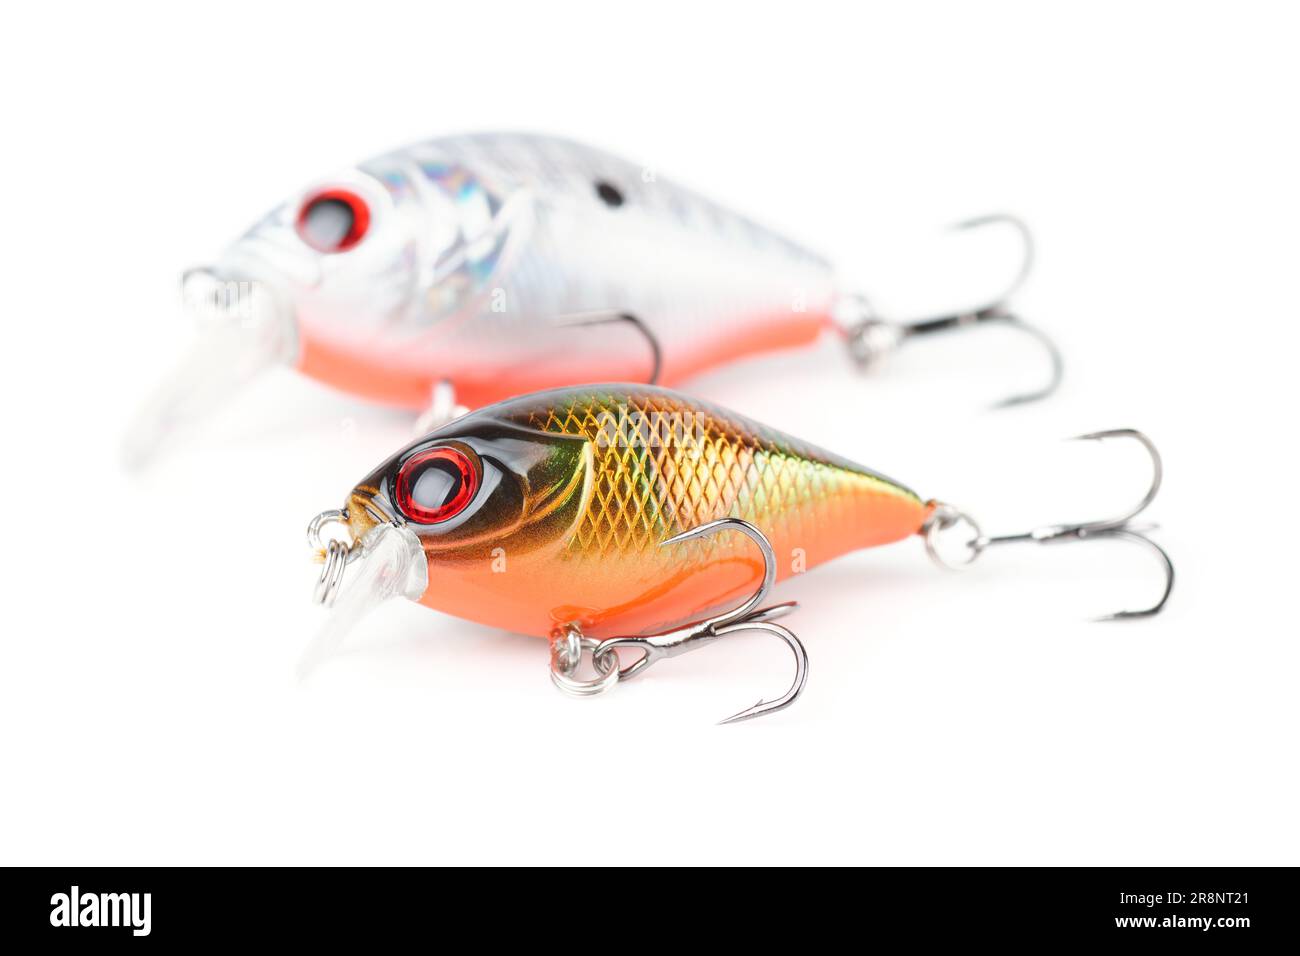 Fishing baits and lures Cut Out Stock Images & Pictures - Alamy